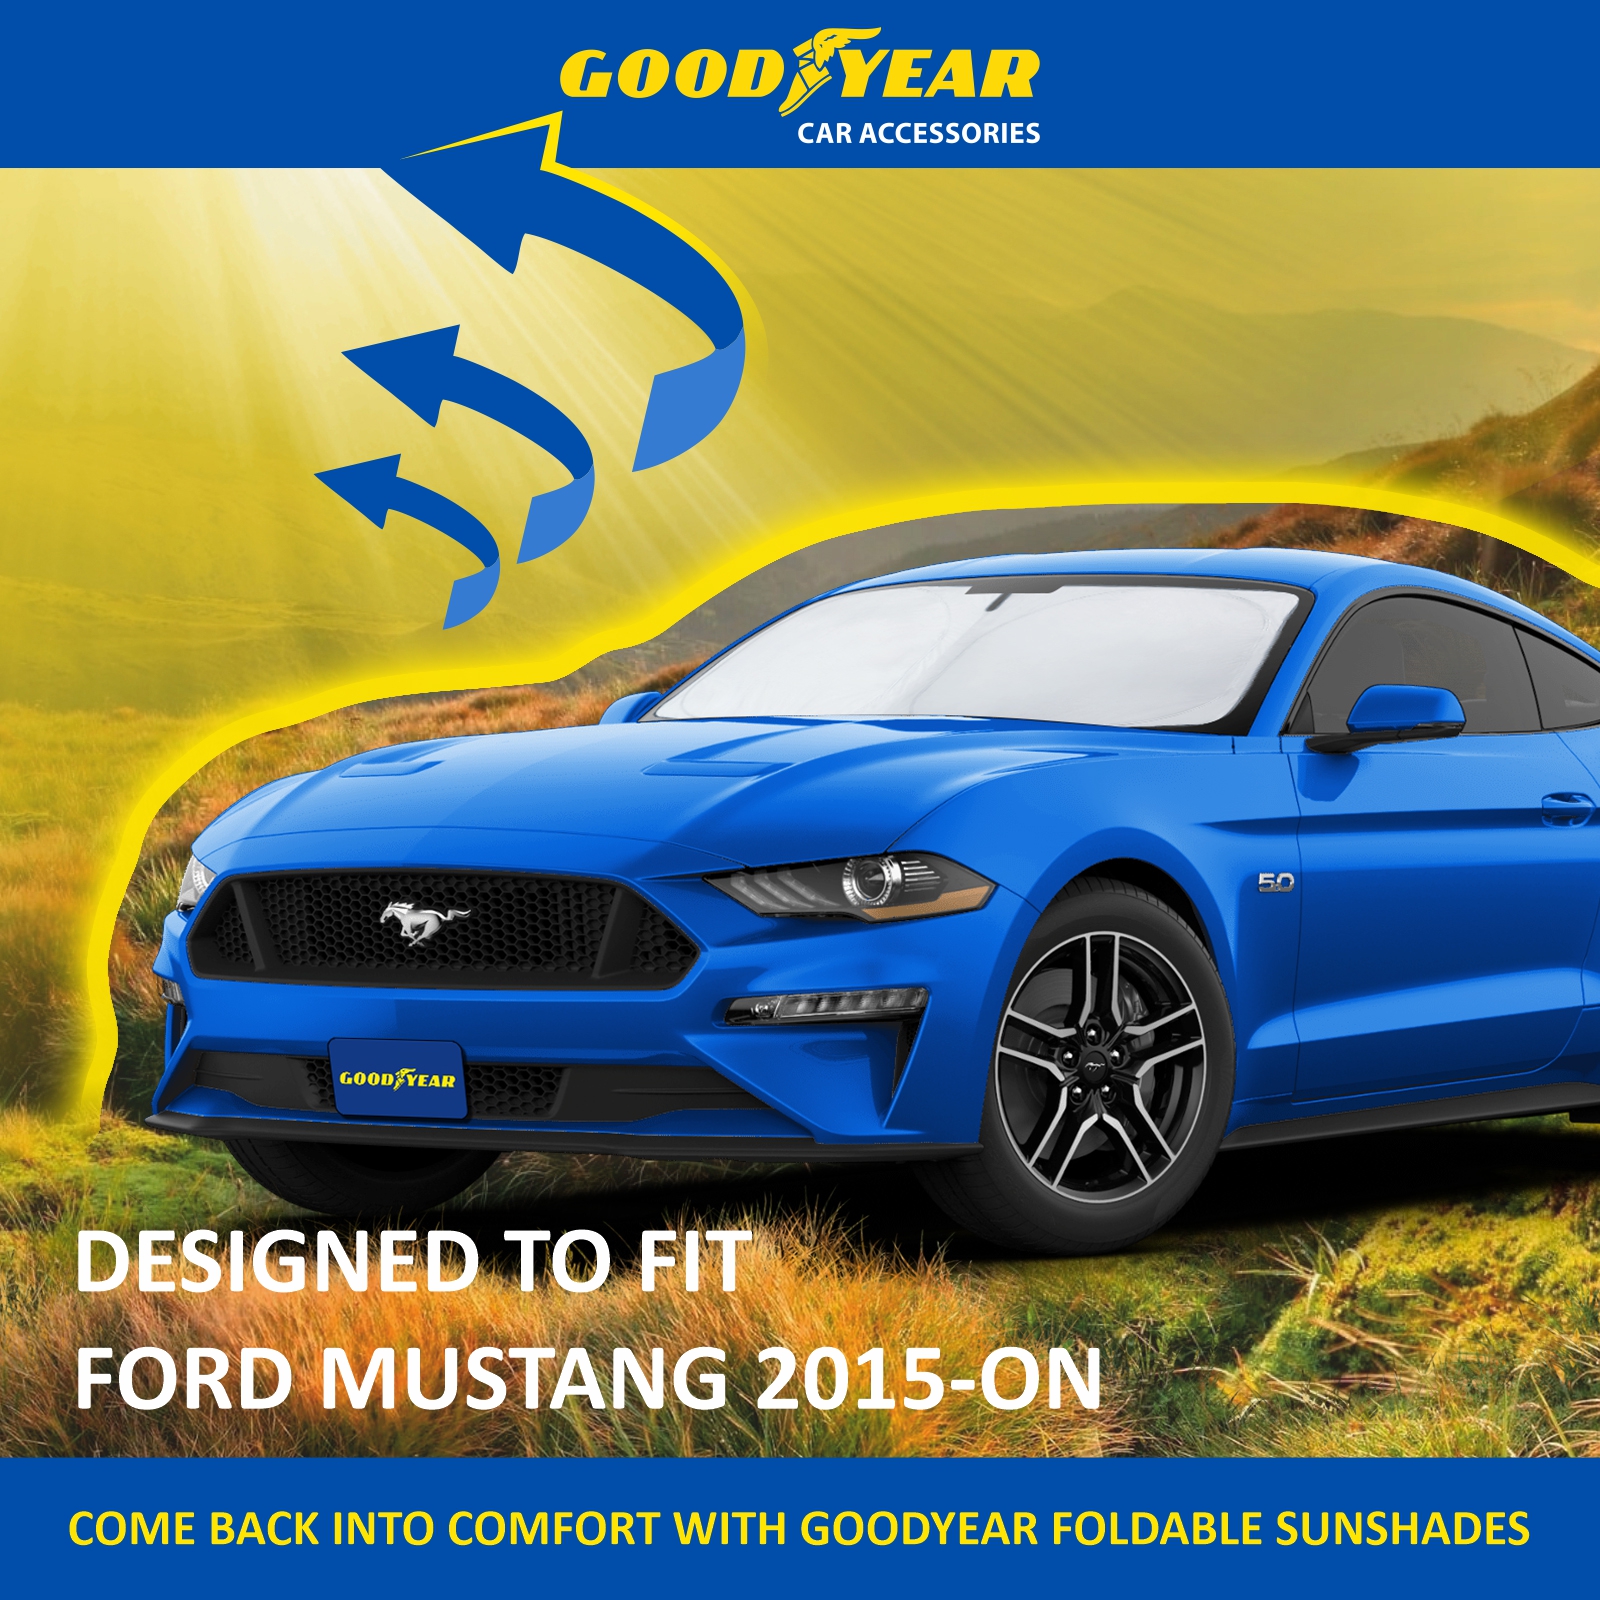 Goodyear Foldable Windshield Sun Shade for Ford Mustang 2015-2023, Custom-Fit Car Windshield Cover,Car Sunshade,UV Protection,Vehicle Sun Protector,Auto Car Window Shades for Front Window - GY008290 - image 5 of 7